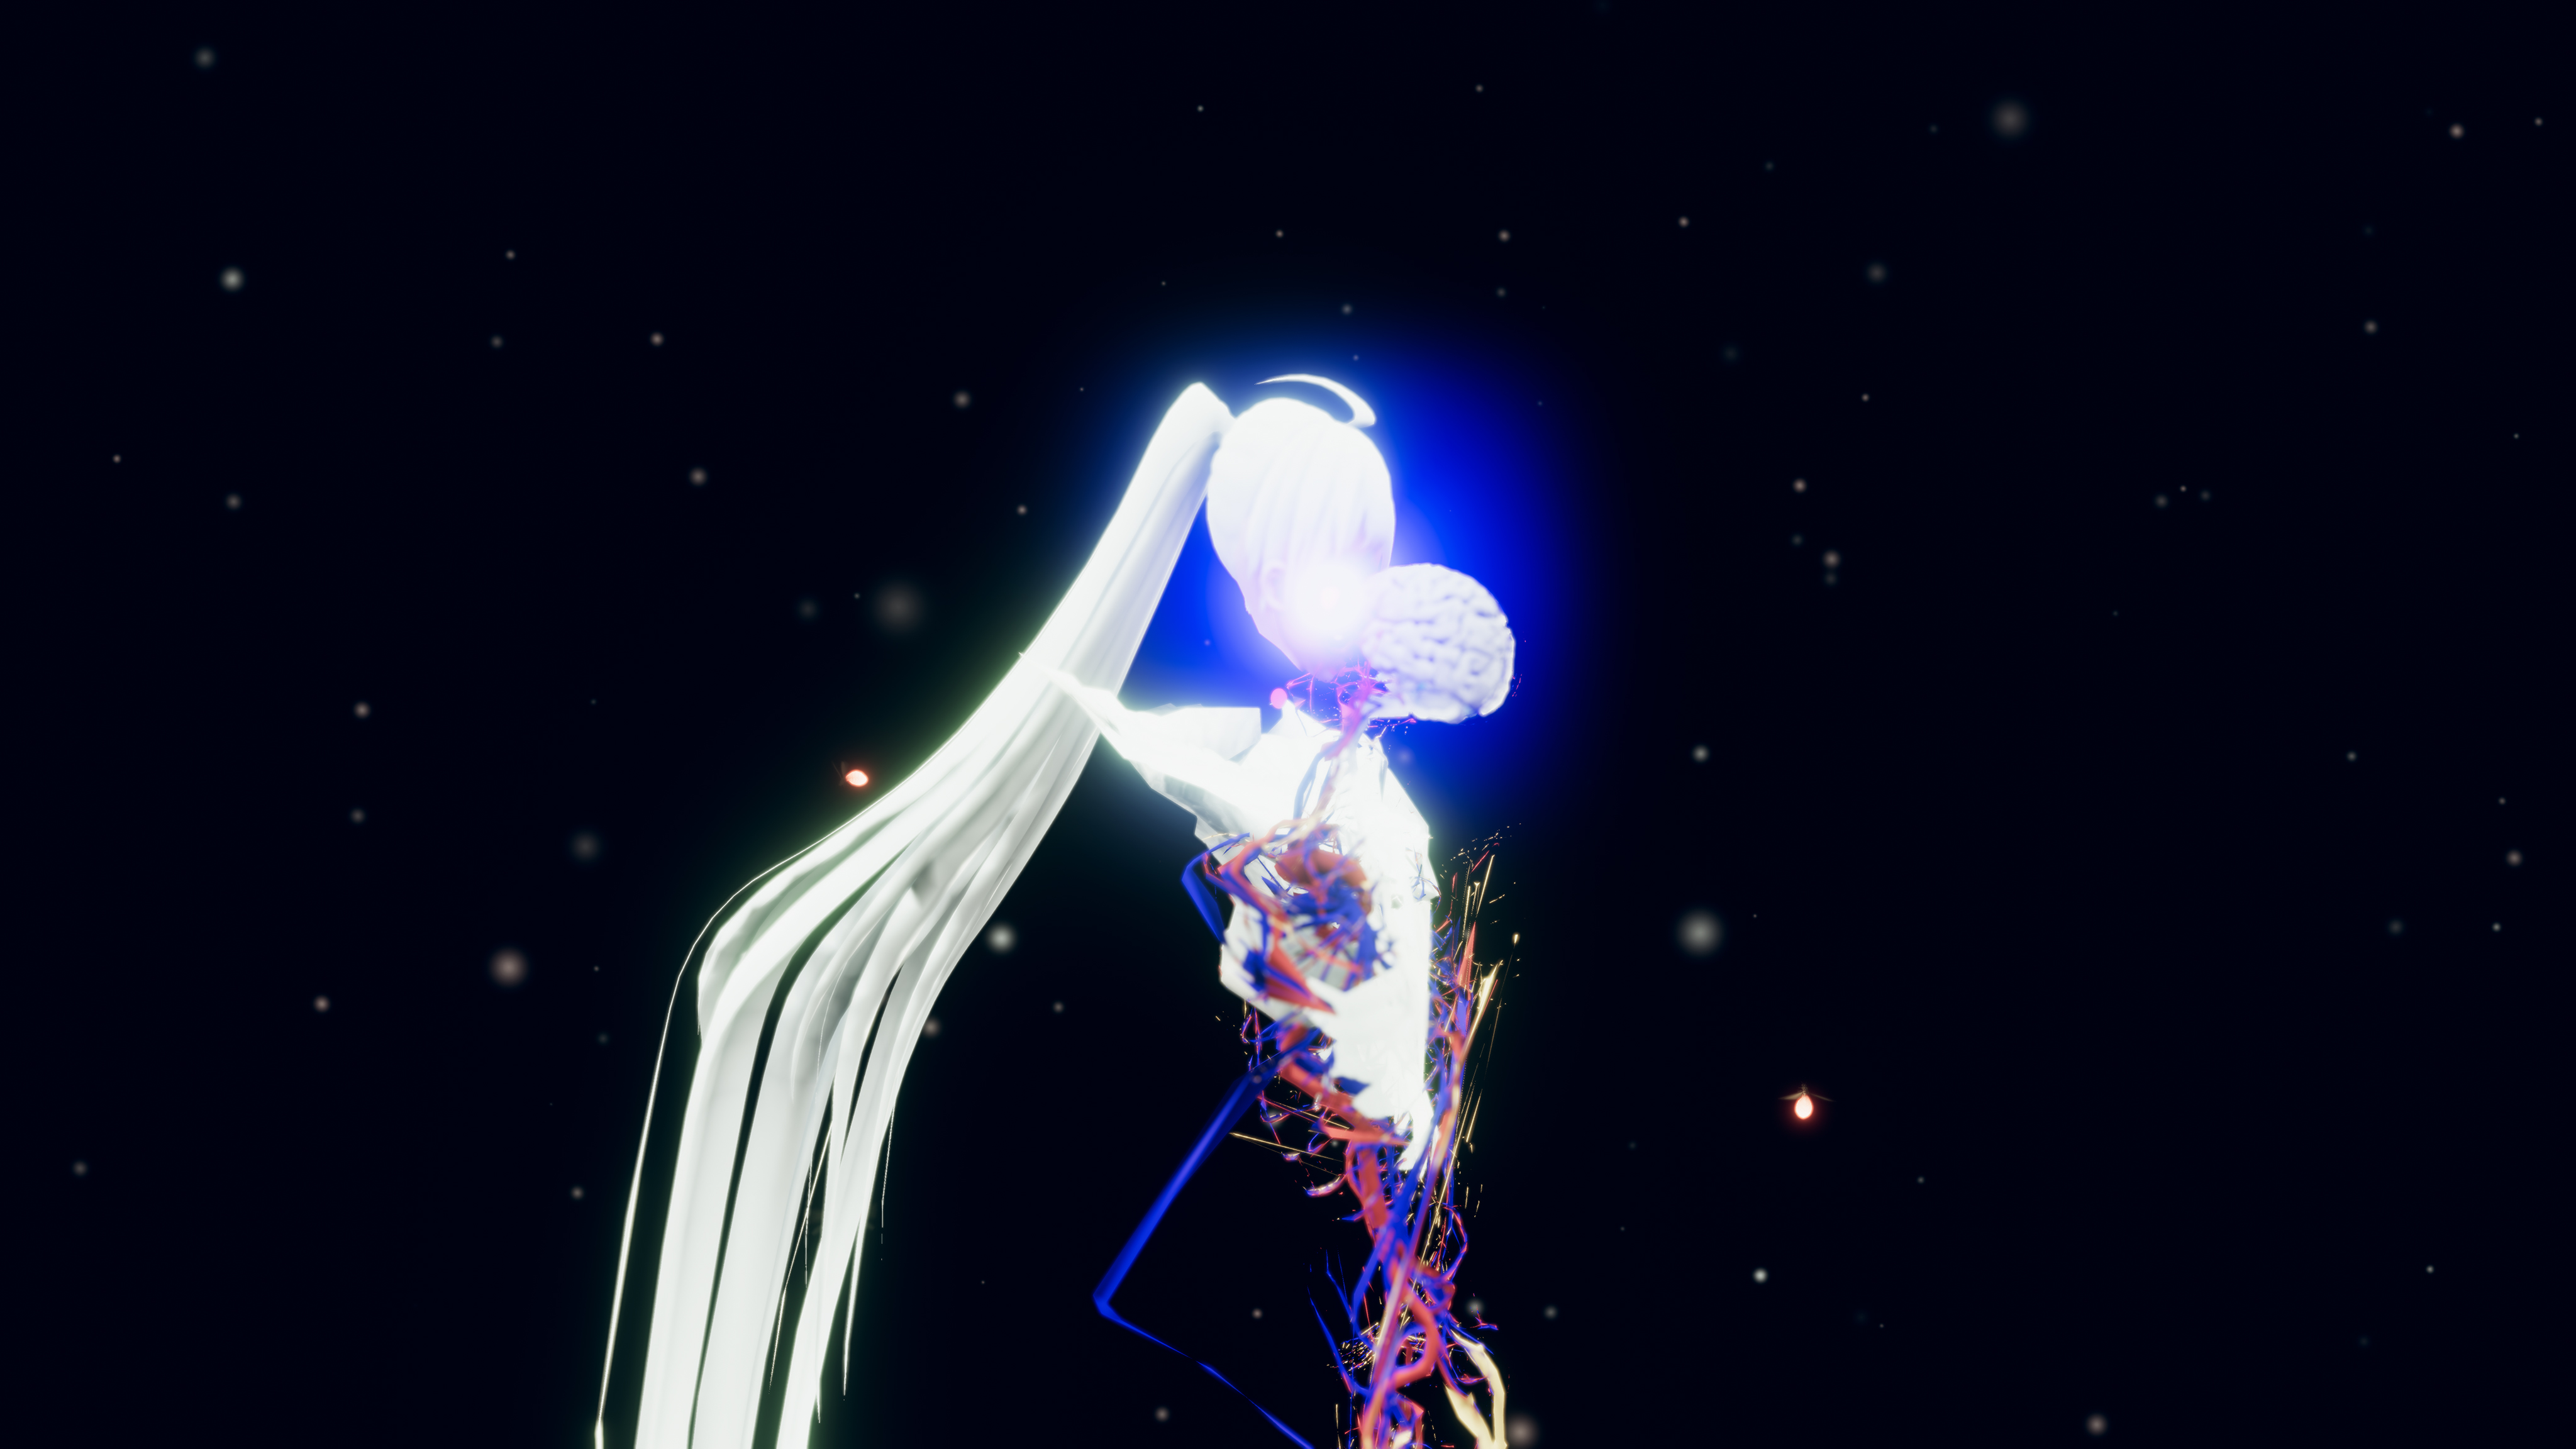 A computer generated figure with a brain outside of their head, long white lines for hair, and a distorted rig cage like interior of the body visible, over a black background.